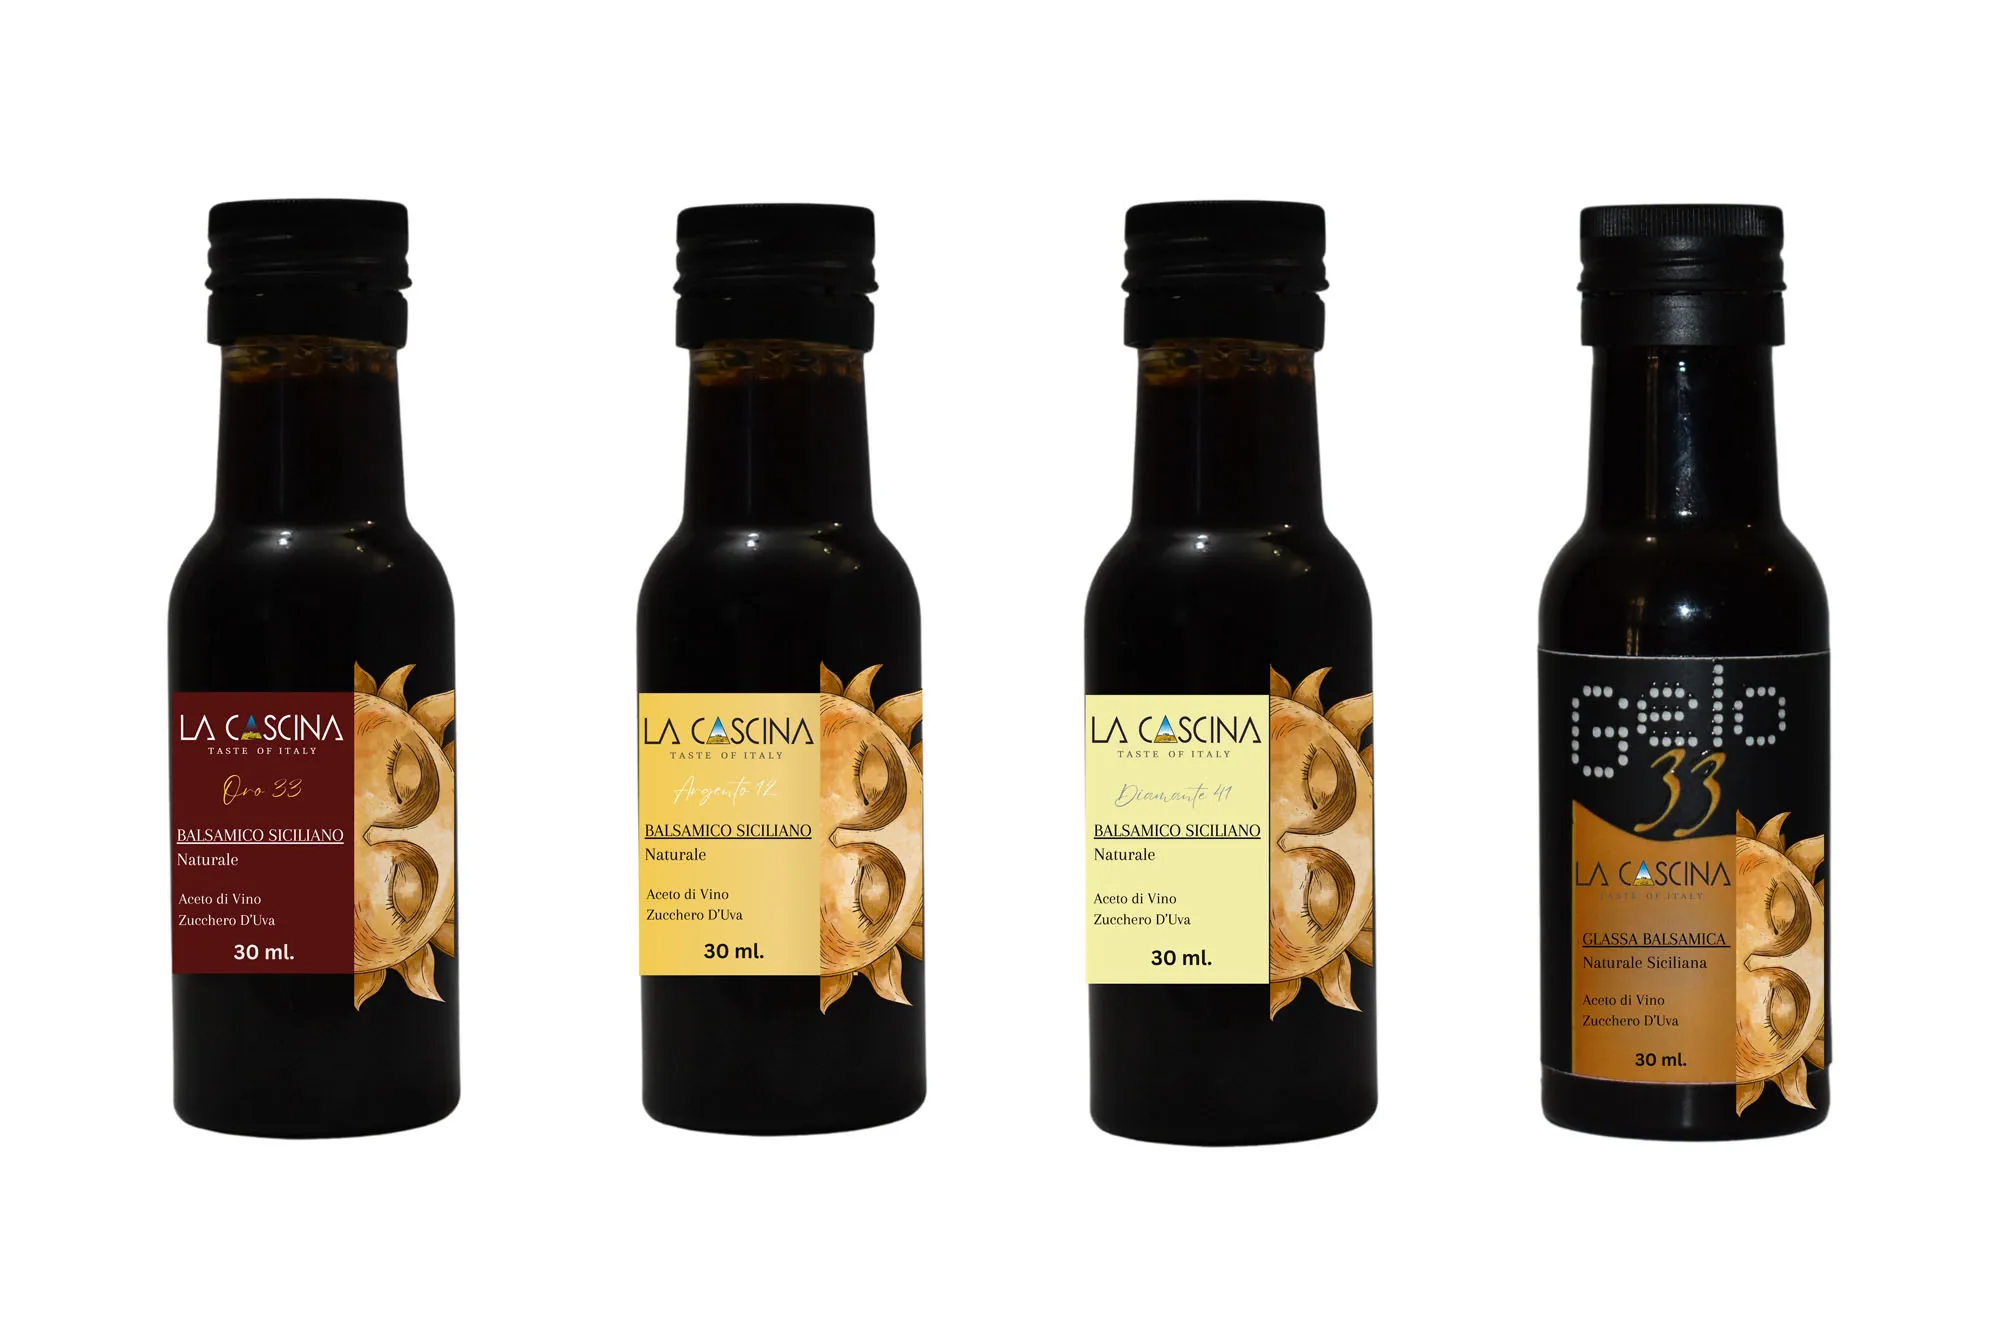 Balsamic vinegar of Sicily reserve diamond, gold, silver and frost  in box of 4 bottles of 30ml: 